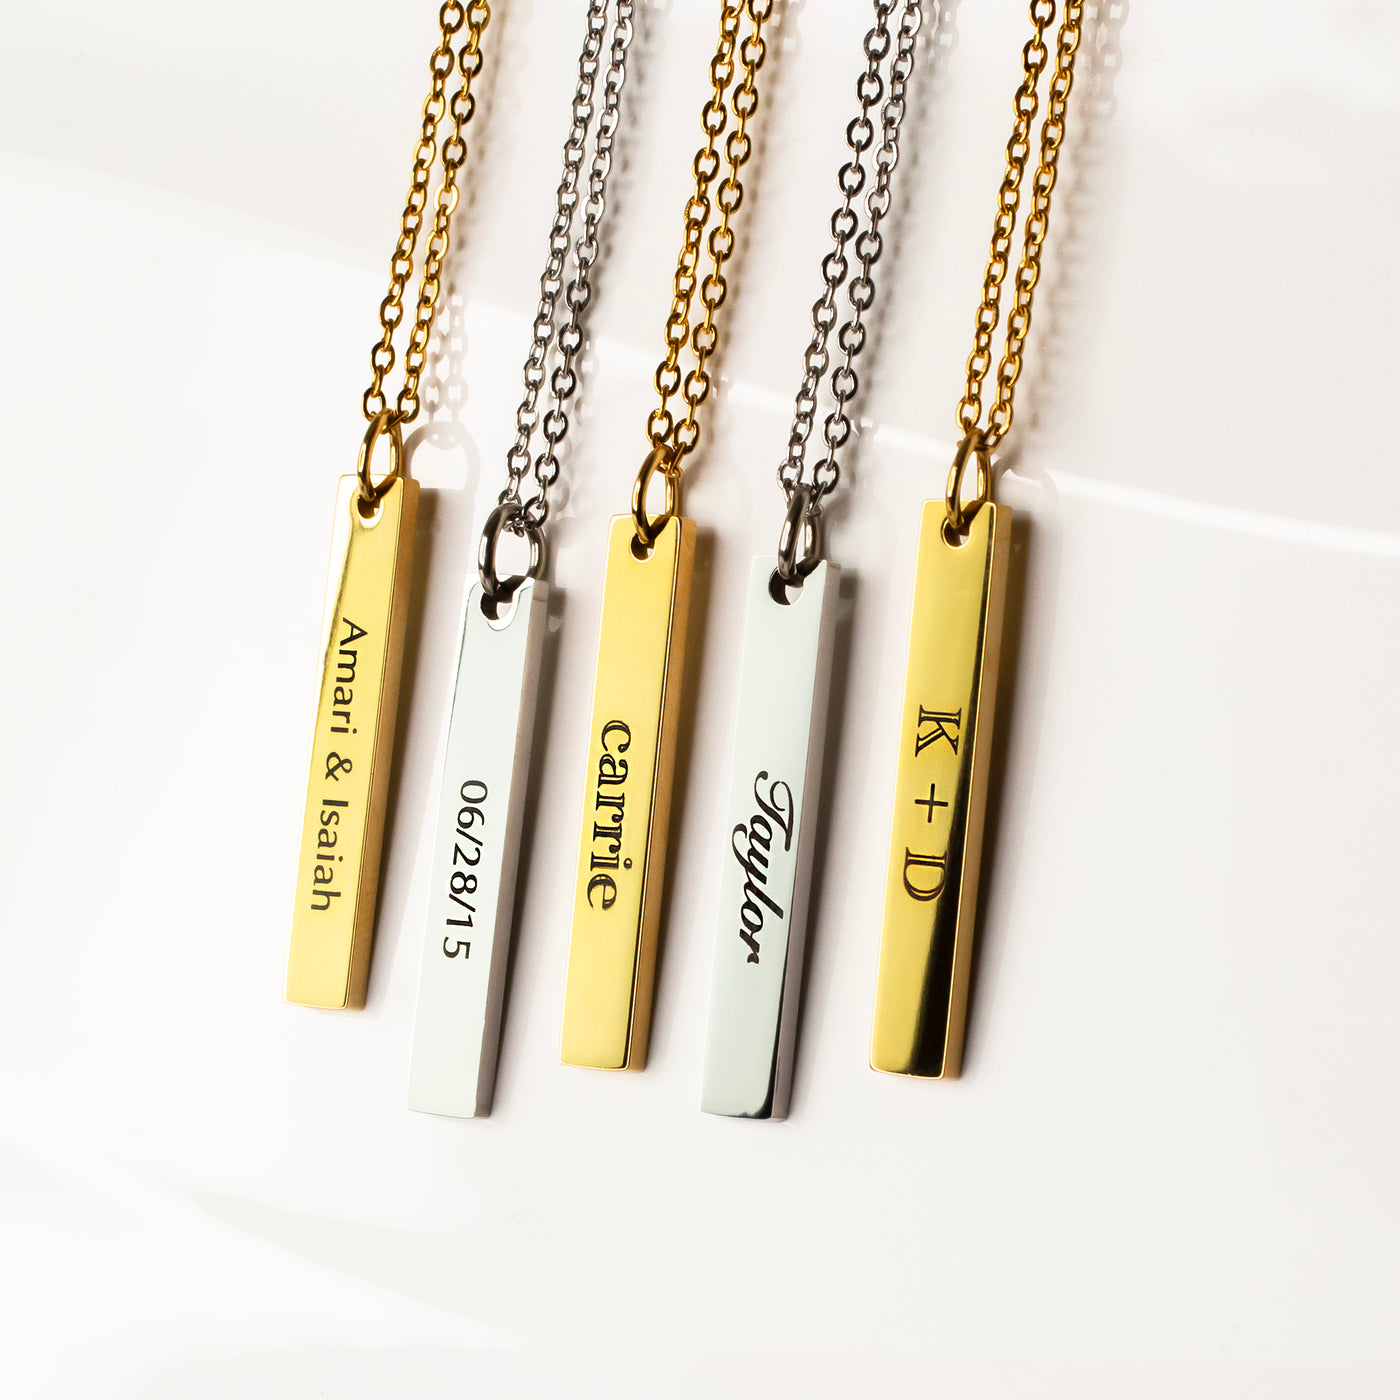 BAWLI BOOCH Personalized Engraving,Customize Name Bar Necklace Square 3D Bar  Custom Necklace Stainless Steel Chain Set Price in India - Buy BAWLI BOOCH Personalized  Engraving,Customize Name Bar Necklace Square 3D Bar Custom